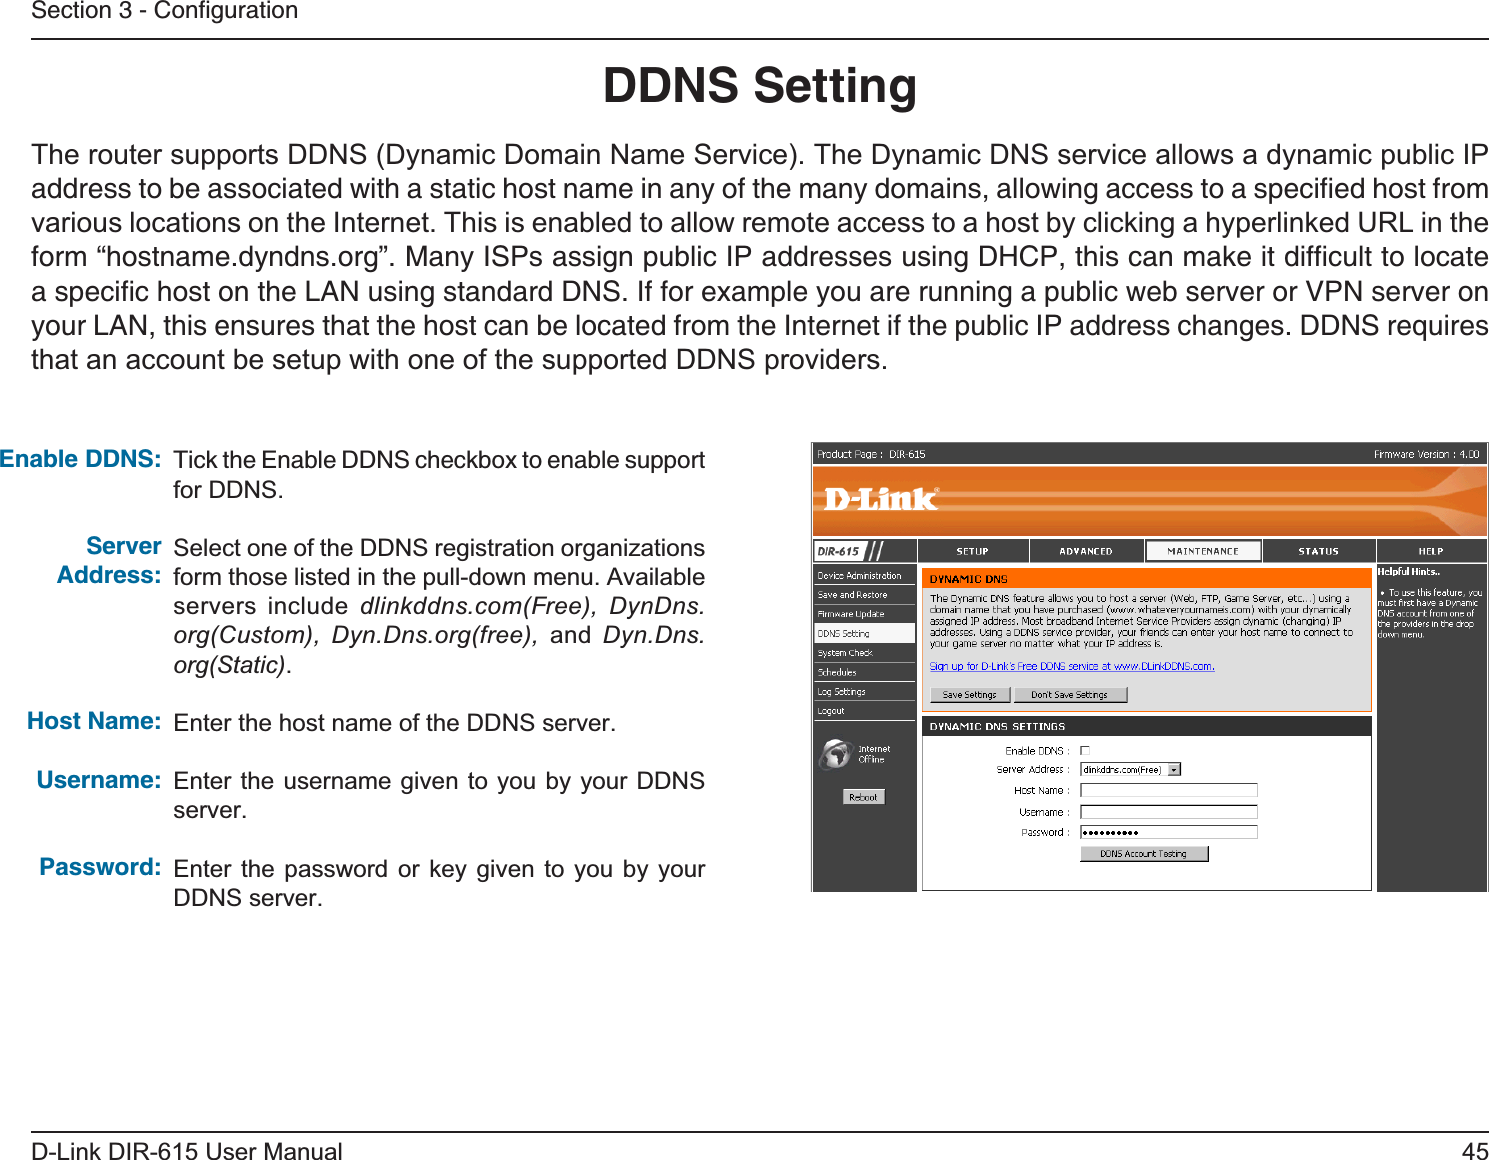 45D-Link DIR-615 User ManualSection 3 - ConﬁgurationDDNS SettingTick the Enable DDNS checkbox to enable support for DDNS.Select one of the DDNS registration organizations form those listed in the pull-down menu. Available servers include dlinkddns.com(Free), DynDns.org(Custom), Dyn.Dns.org(free), and Dyn.Dns.org(Static).Enter the host name of the DDNS server.Enter the username given to you by your DDNS server.Enter the password or key given to you by your DDNS server.Enable DDNS:Server Address:Host Name:Username:Password:The router supports DDNS (Dynamic Domain Name Service). The Dynamic DNS service allows a dynamic public IP address to be associated with a static host name in any of the many domains, allowing access to a speciﬁed host from various locations on the Internet. This is enabled to allow remote access to a host by clicking a hyperlinked URL in the form “hostname.dyndns.org”. Many ISPs assign public IP addresses using DHCP, this can make it difﬁcult to locate a speciﬁc host on the LAN using standard DNS. If for example you are running a public web server or VPN server on your LAN, this ensures that the host can be located from the Internet if the public IP address changes. DDNS requires that an account be setup with one of the supported DDNS providers.